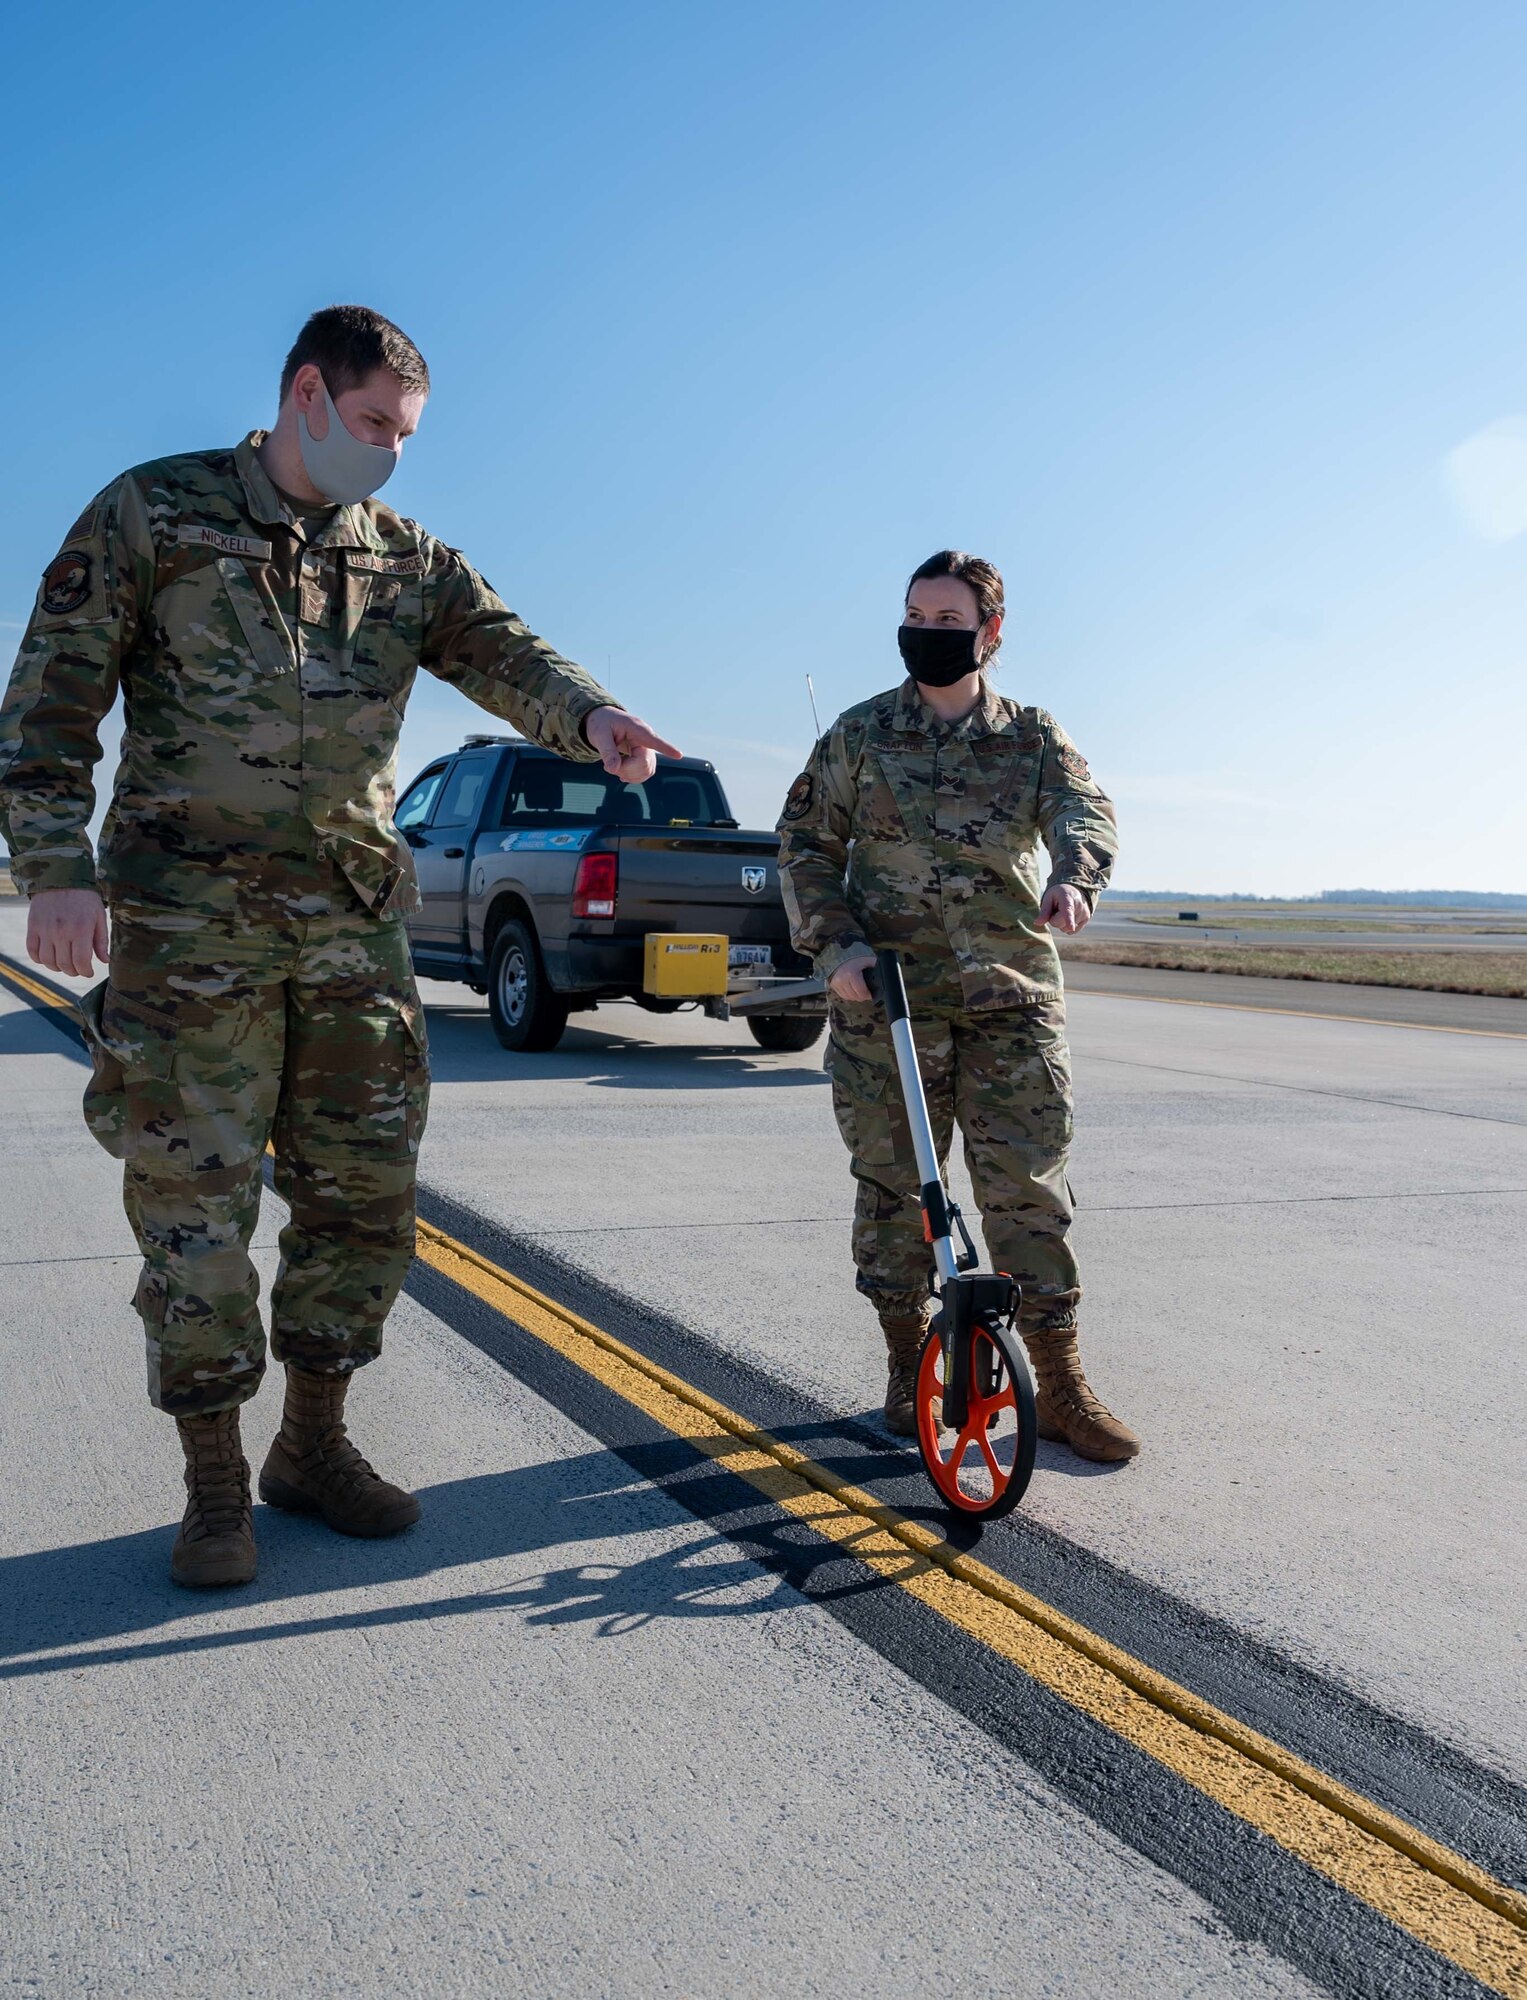 Senior Airman Kristina Grafton, 436th Operation Support Squadron airfield management operations supervisor and Senior Airman Keyton Nickell, 436th Airfield Operation Support Squadron airfield management shift lead, measure a center taxi line on the runway at Dover Air Force Base, Delaware, Jan. 14, 2021. As airfield management journeymen, Grafton and Nickell manage airfield operations, coordinate with civil engineers, safety, air traffic control and various other base agencies to ensure safe aircraft operations within the airfield of Dover AFB. (U.S. Air Force photo by Airman 1st Class Faith Schaefer)